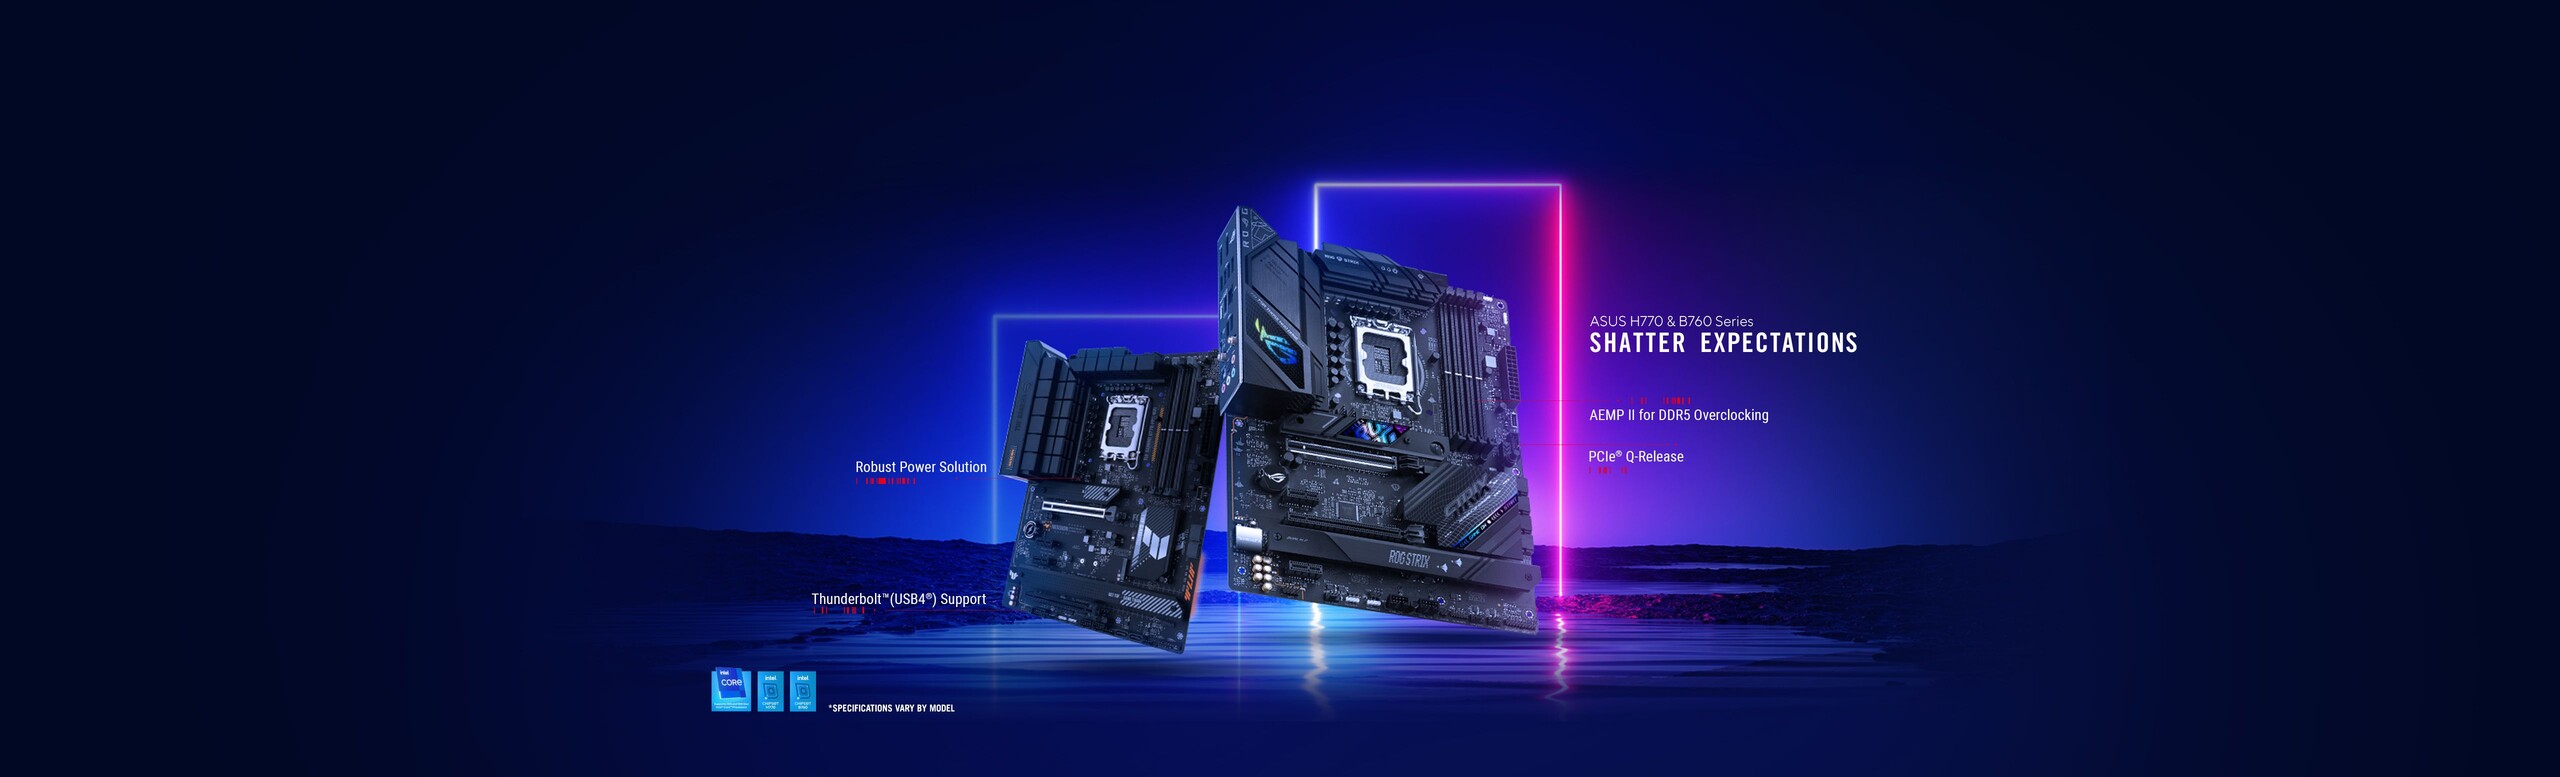 ASUS H770 & B760 Series Shatter Expectations AEMP II for DDR5 Overlocking Robust Power Solution PCle Q-Release Thunderbolt (USB4) Support *Specifications Vary By Model 2 Motherboards in picture along with Intel Logos